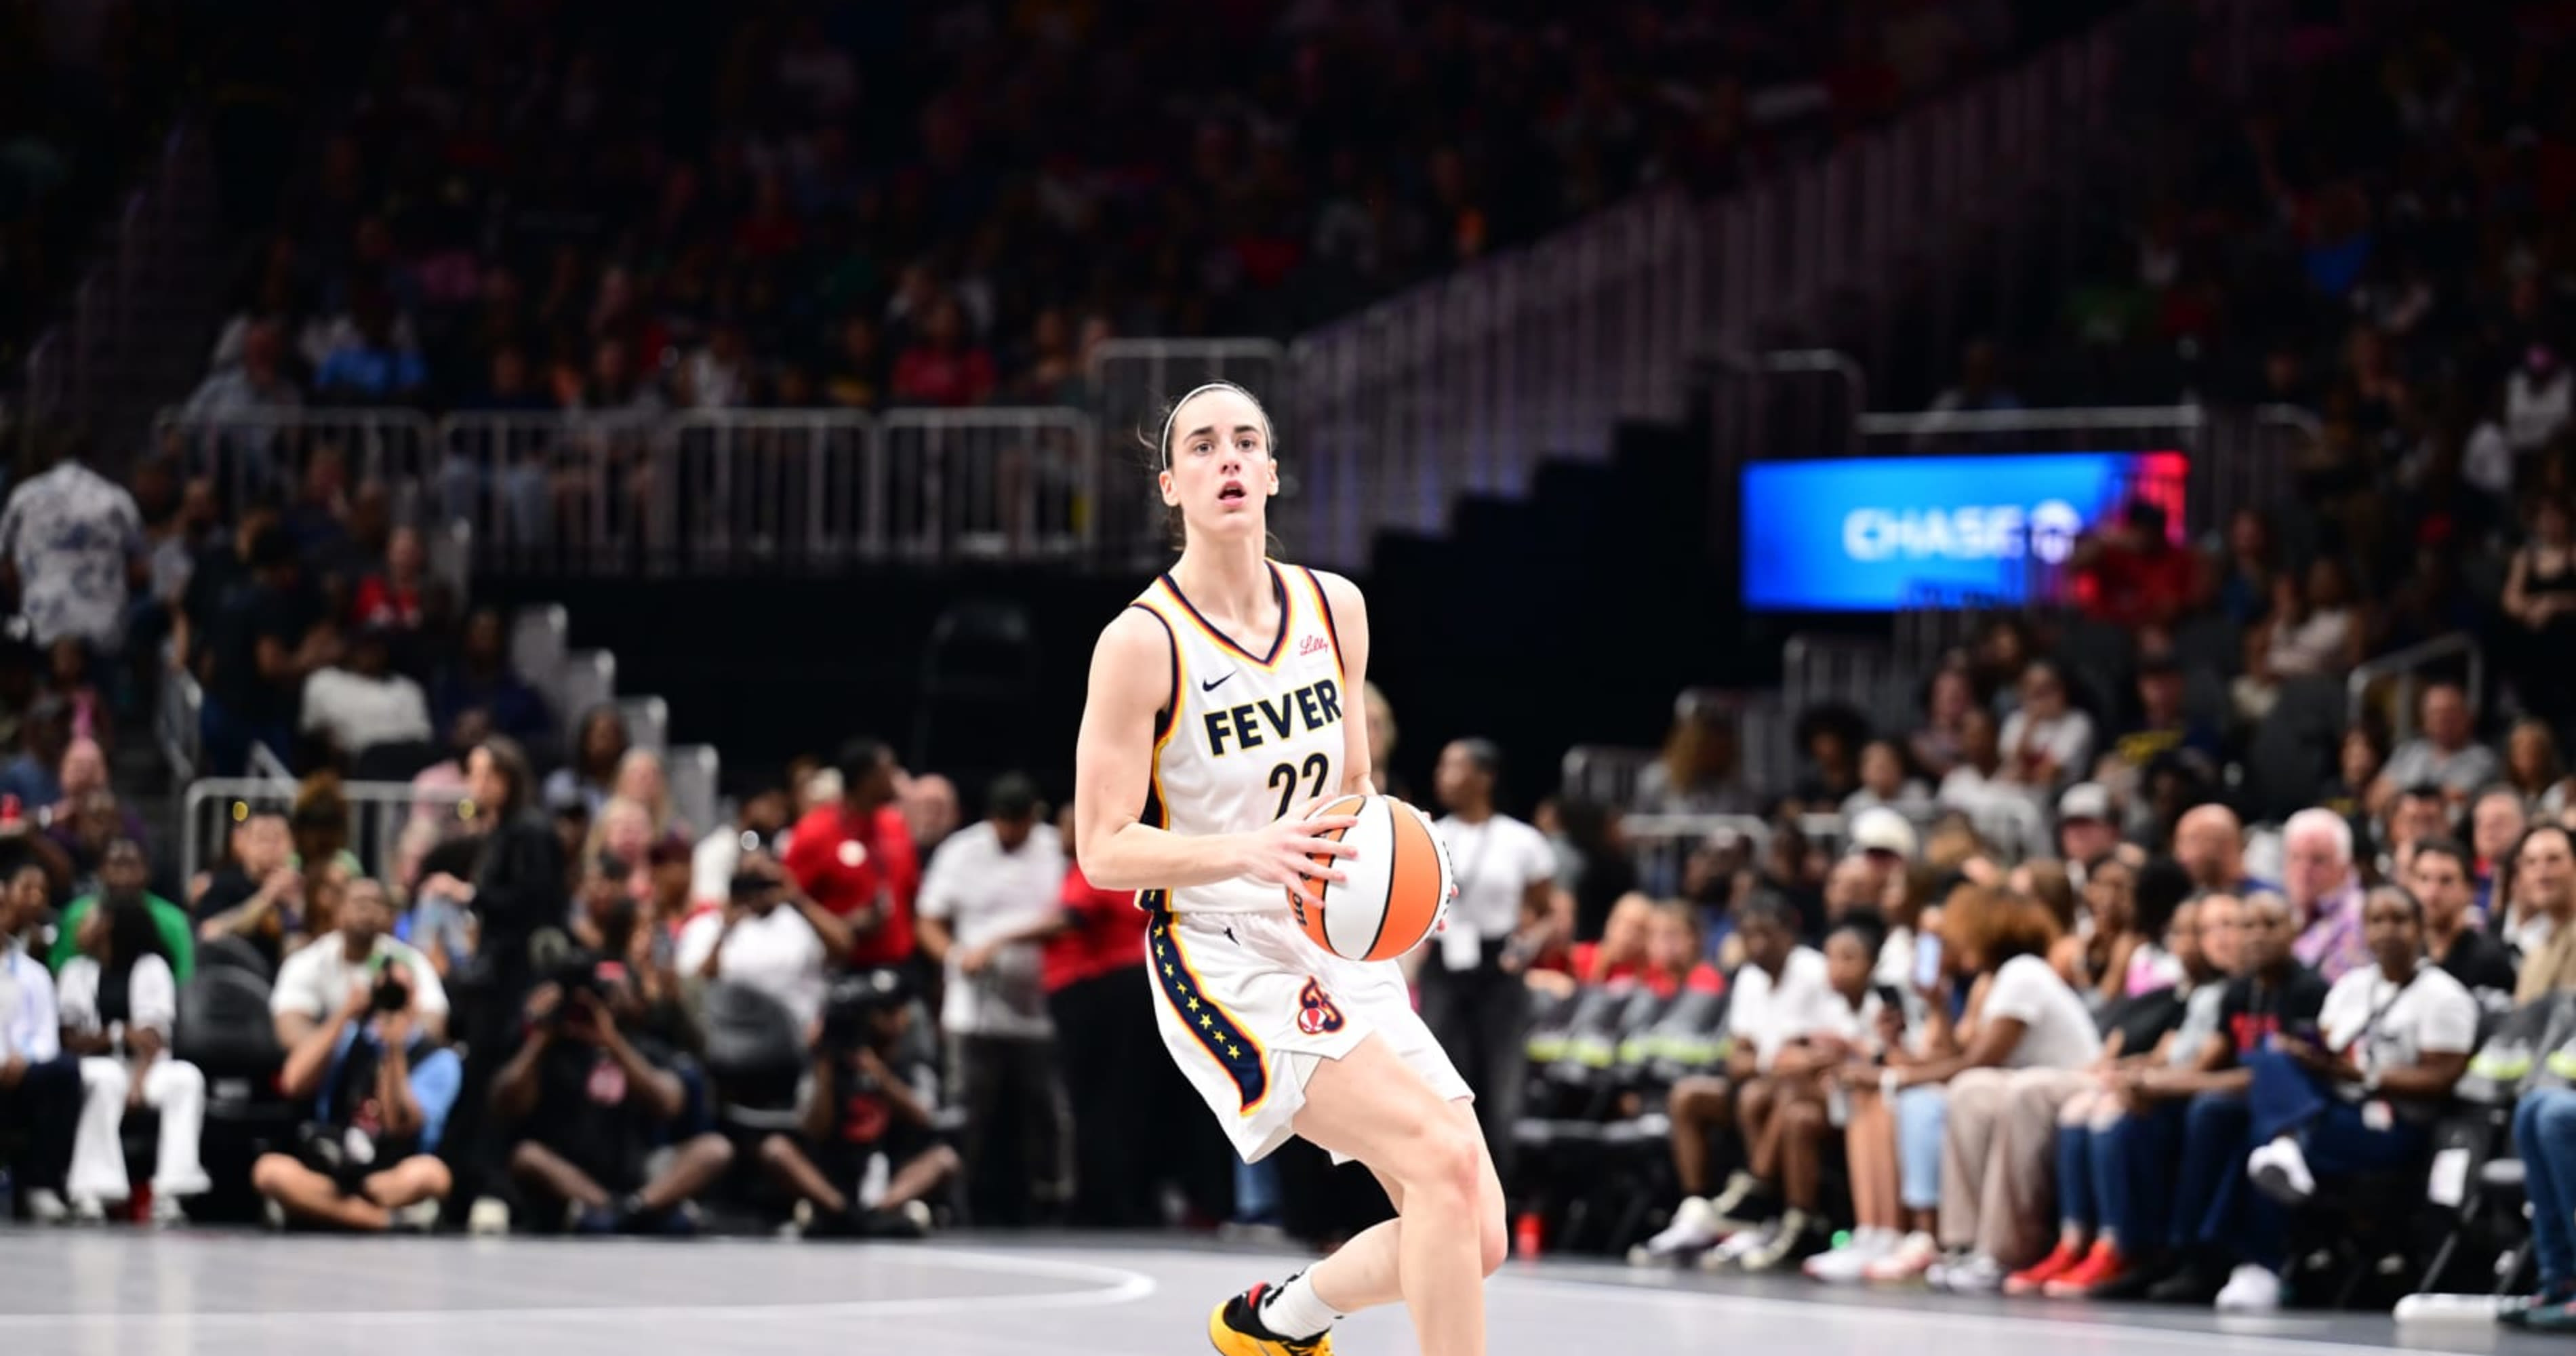 Caitlin Clark Scores 16, Wows WNBA Fans as Fever Beat Dream to Win 4th Straight Game